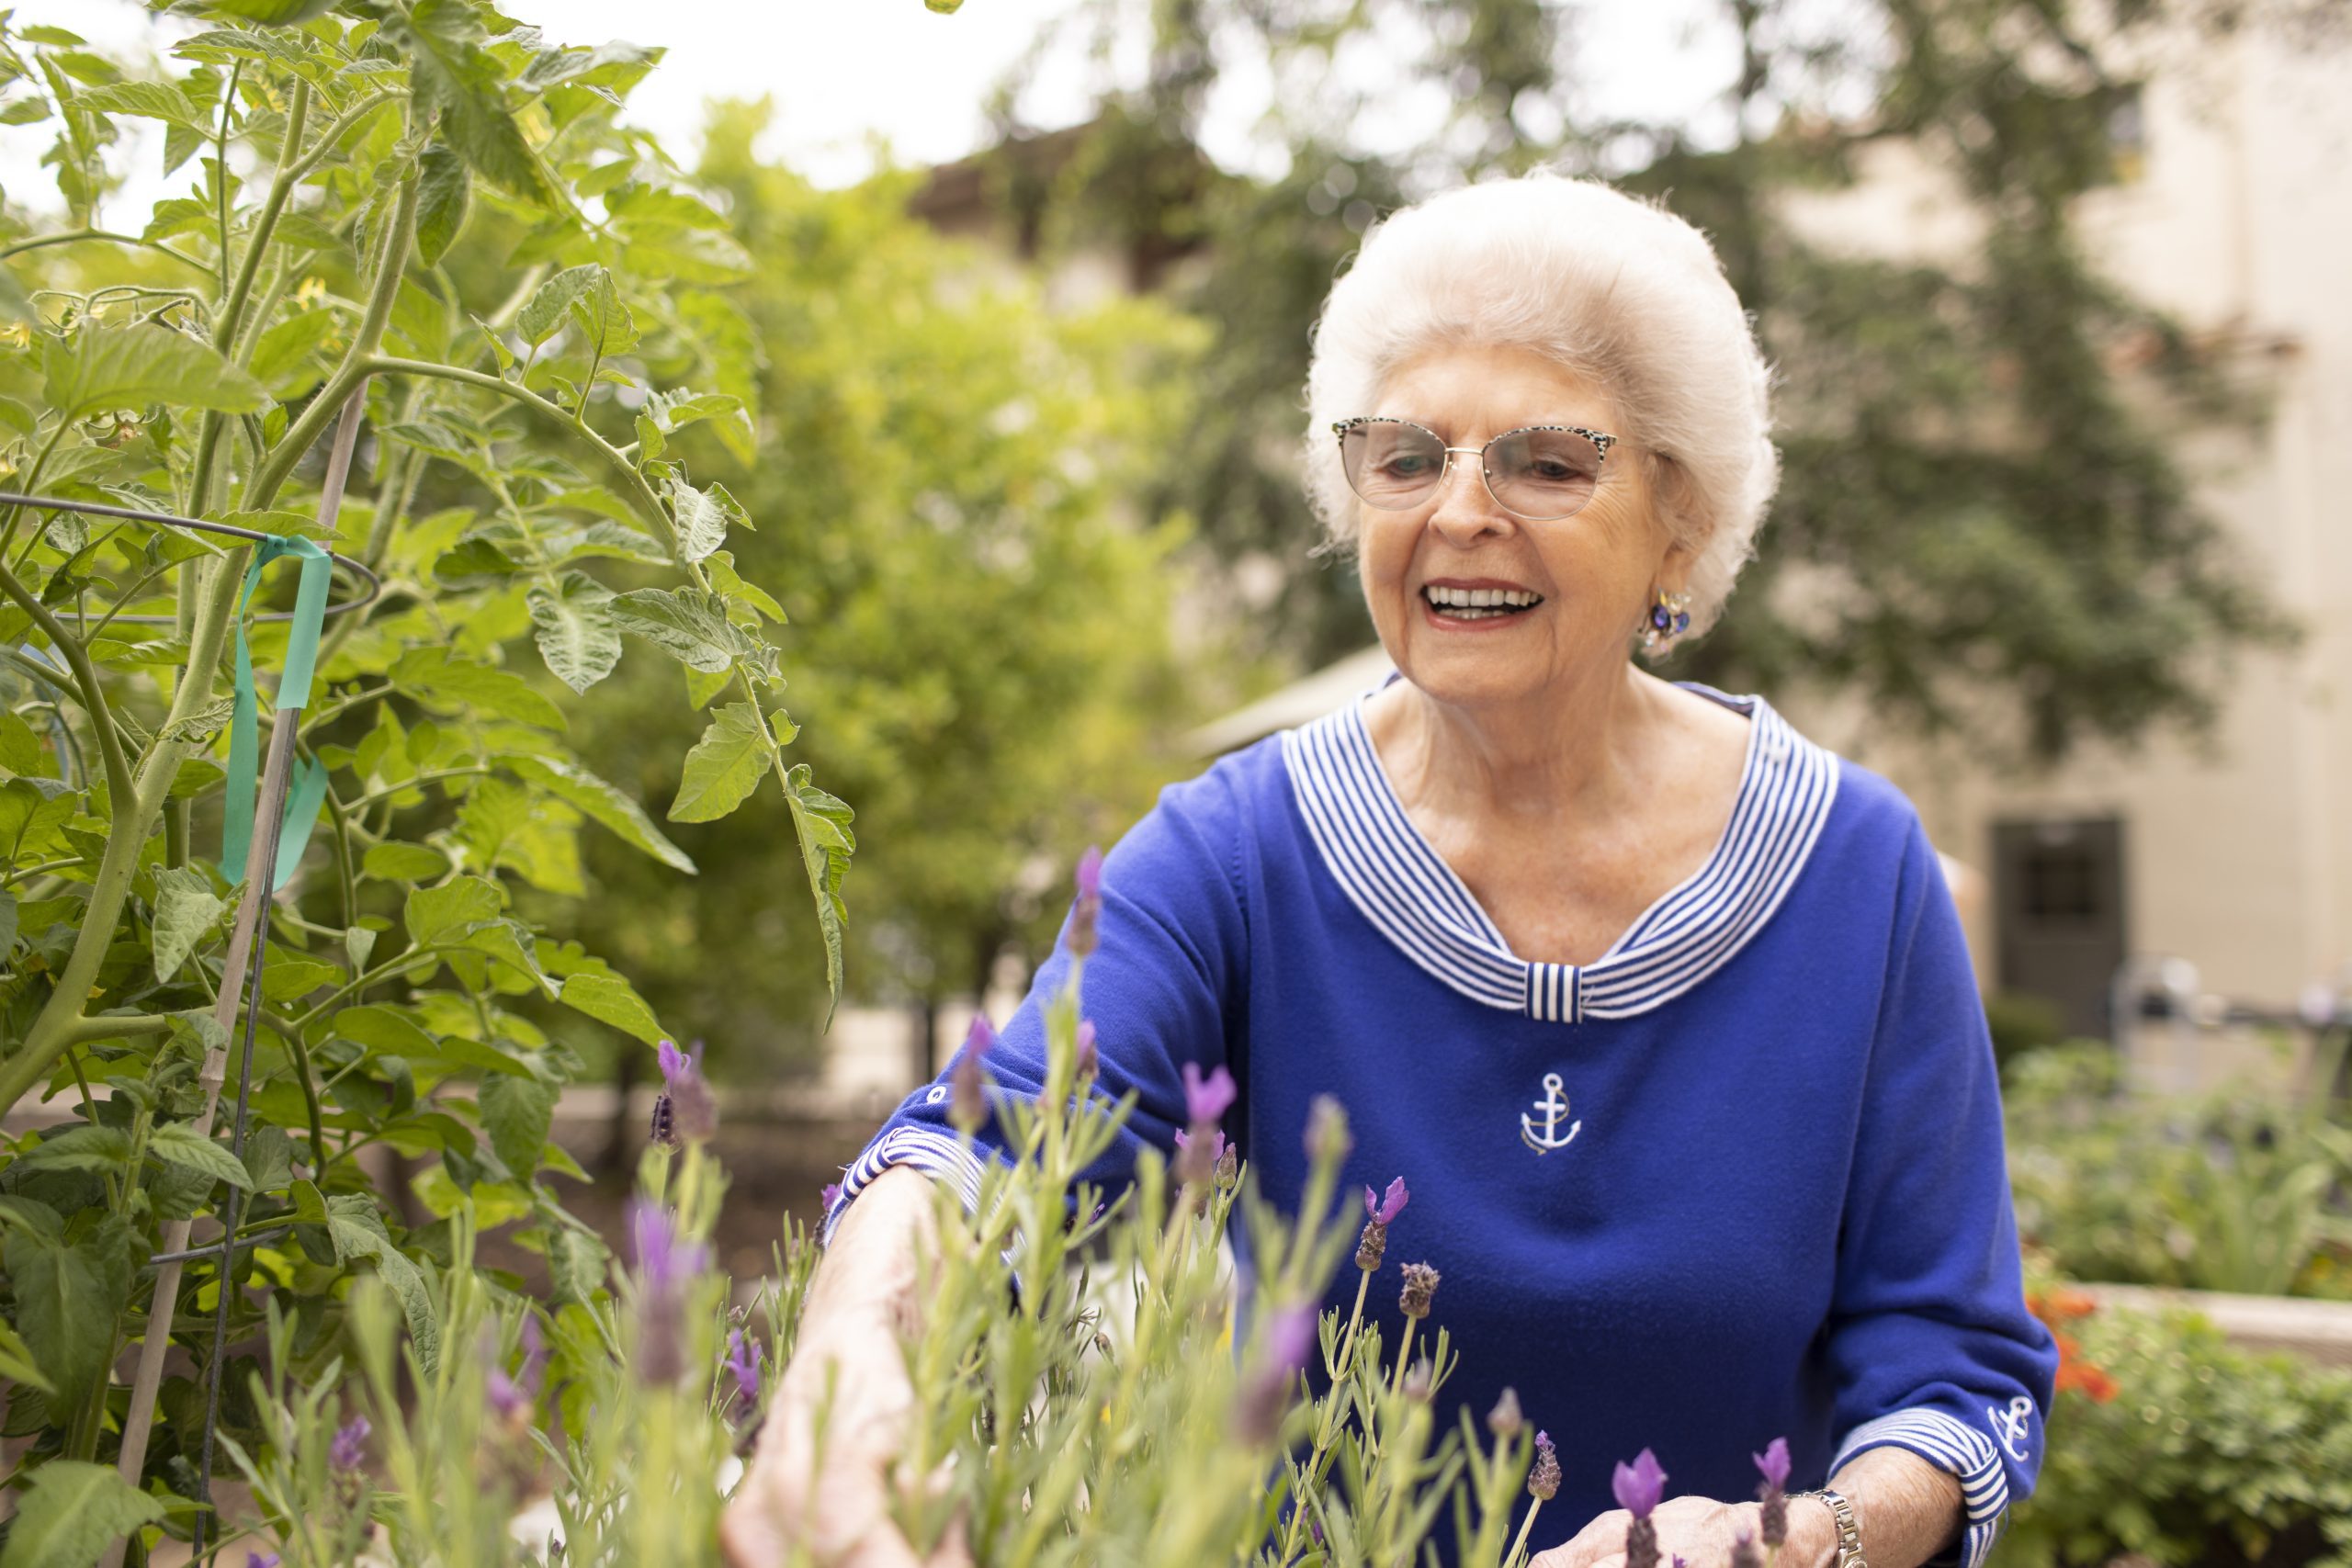 an active elderly woman gardening while wearing a vibrant blue dress